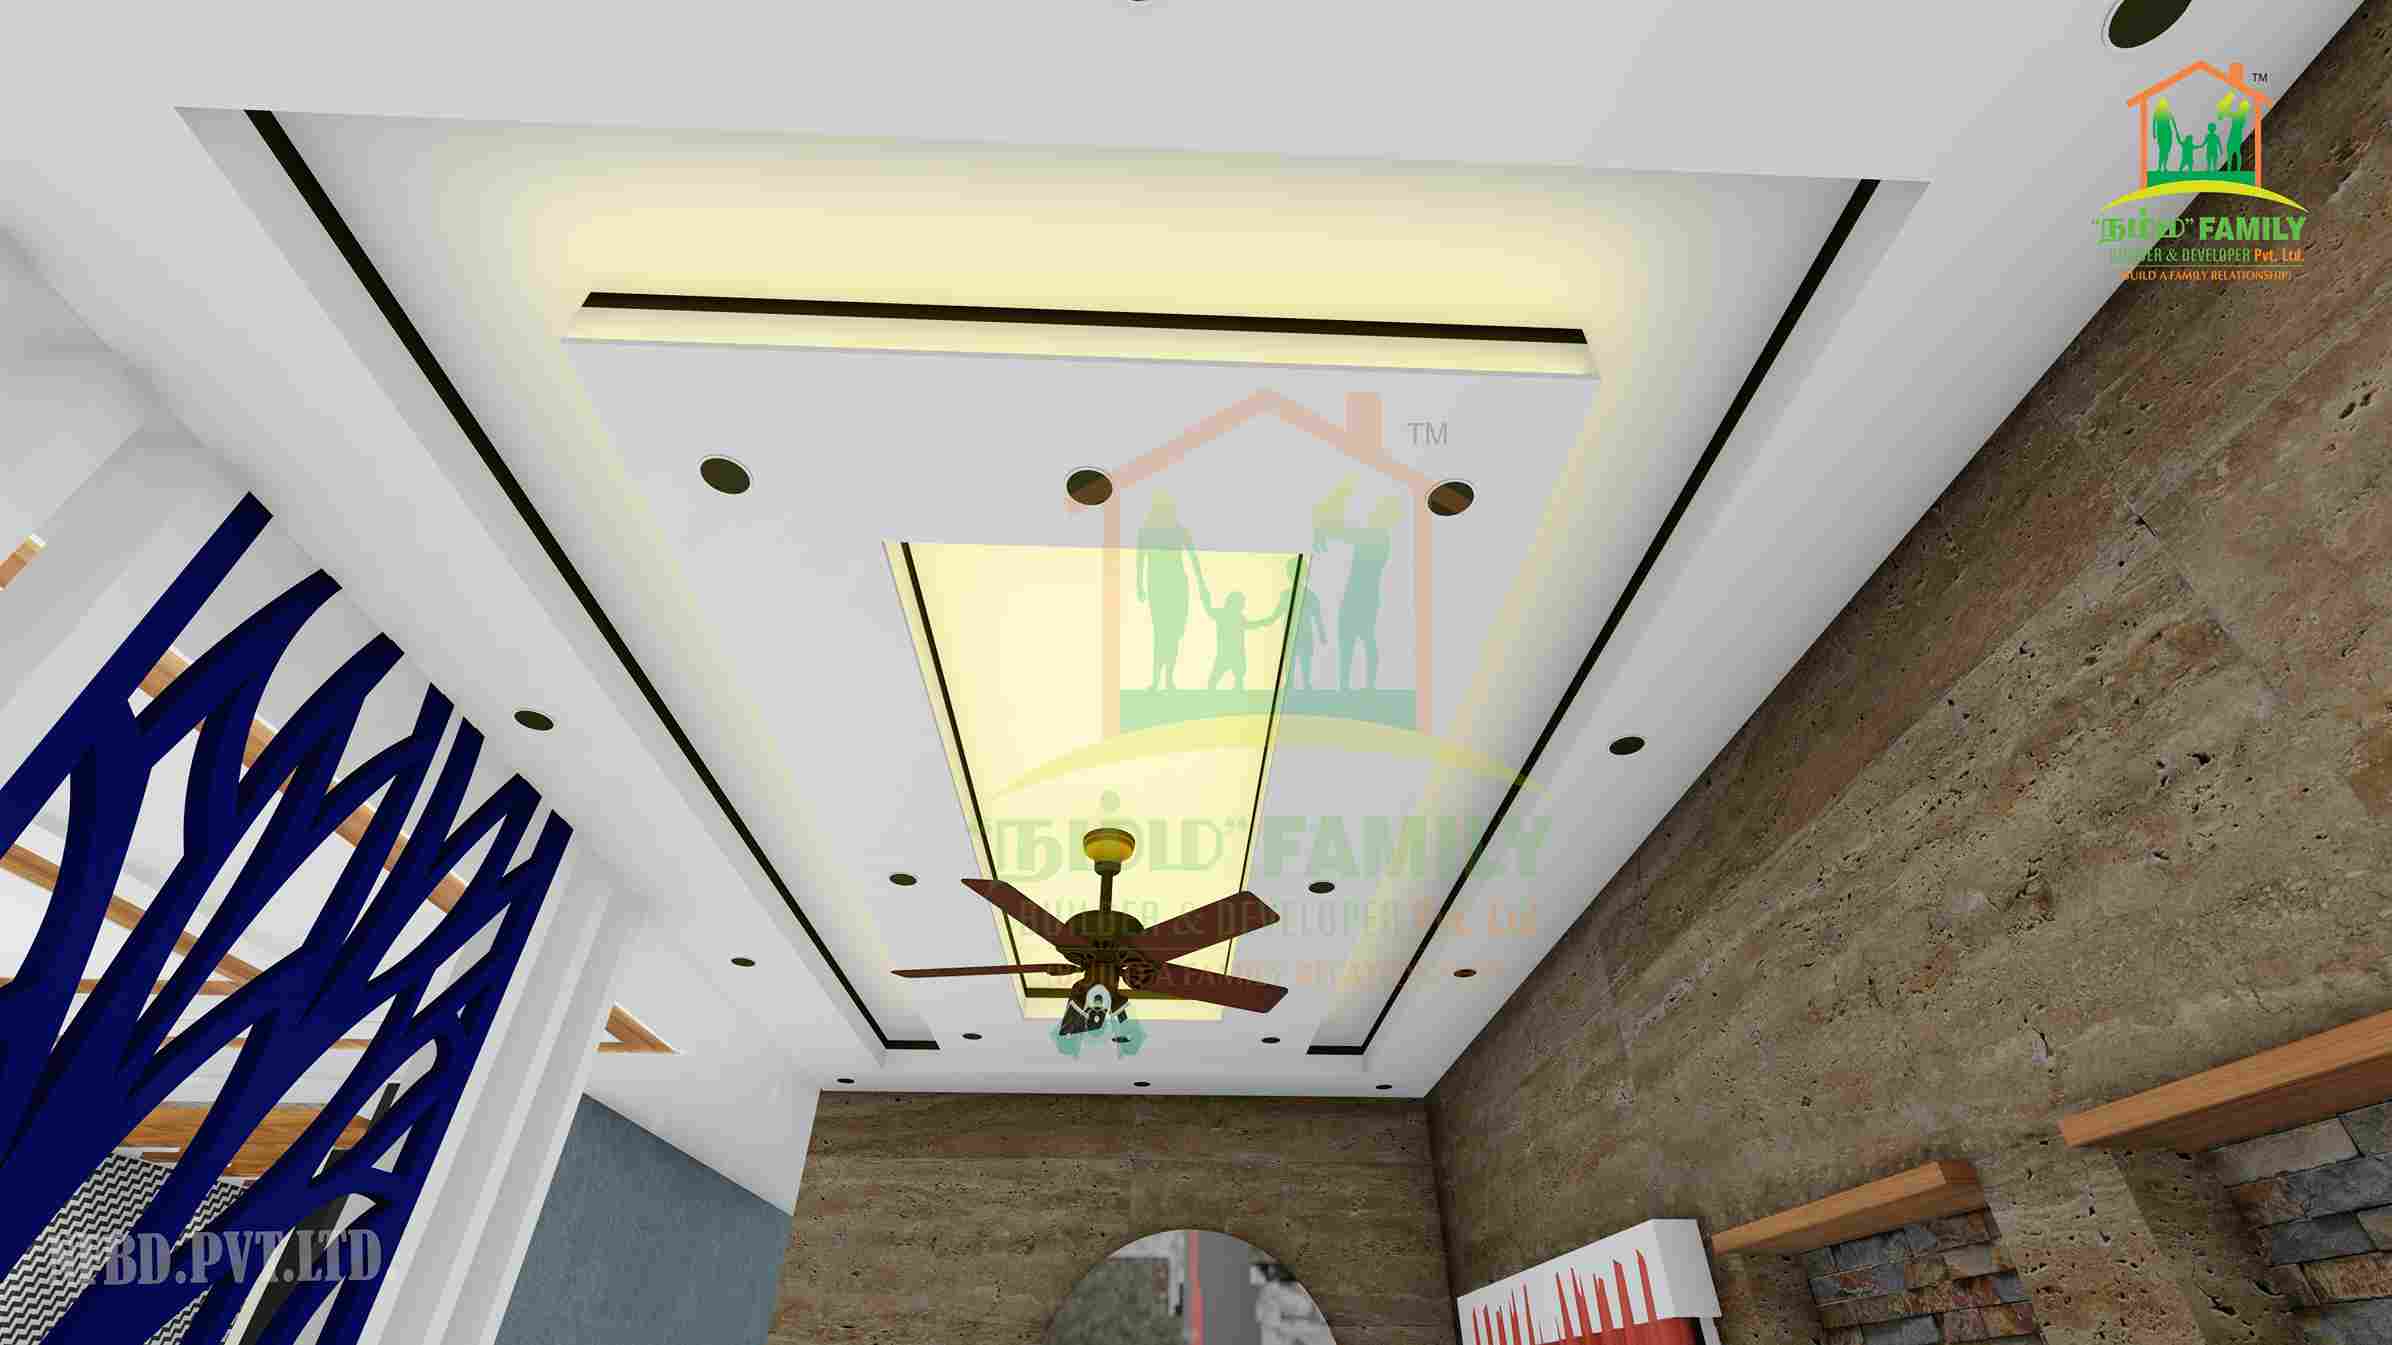 Rafter Design For a False Ceiling for Bedroom with Fan